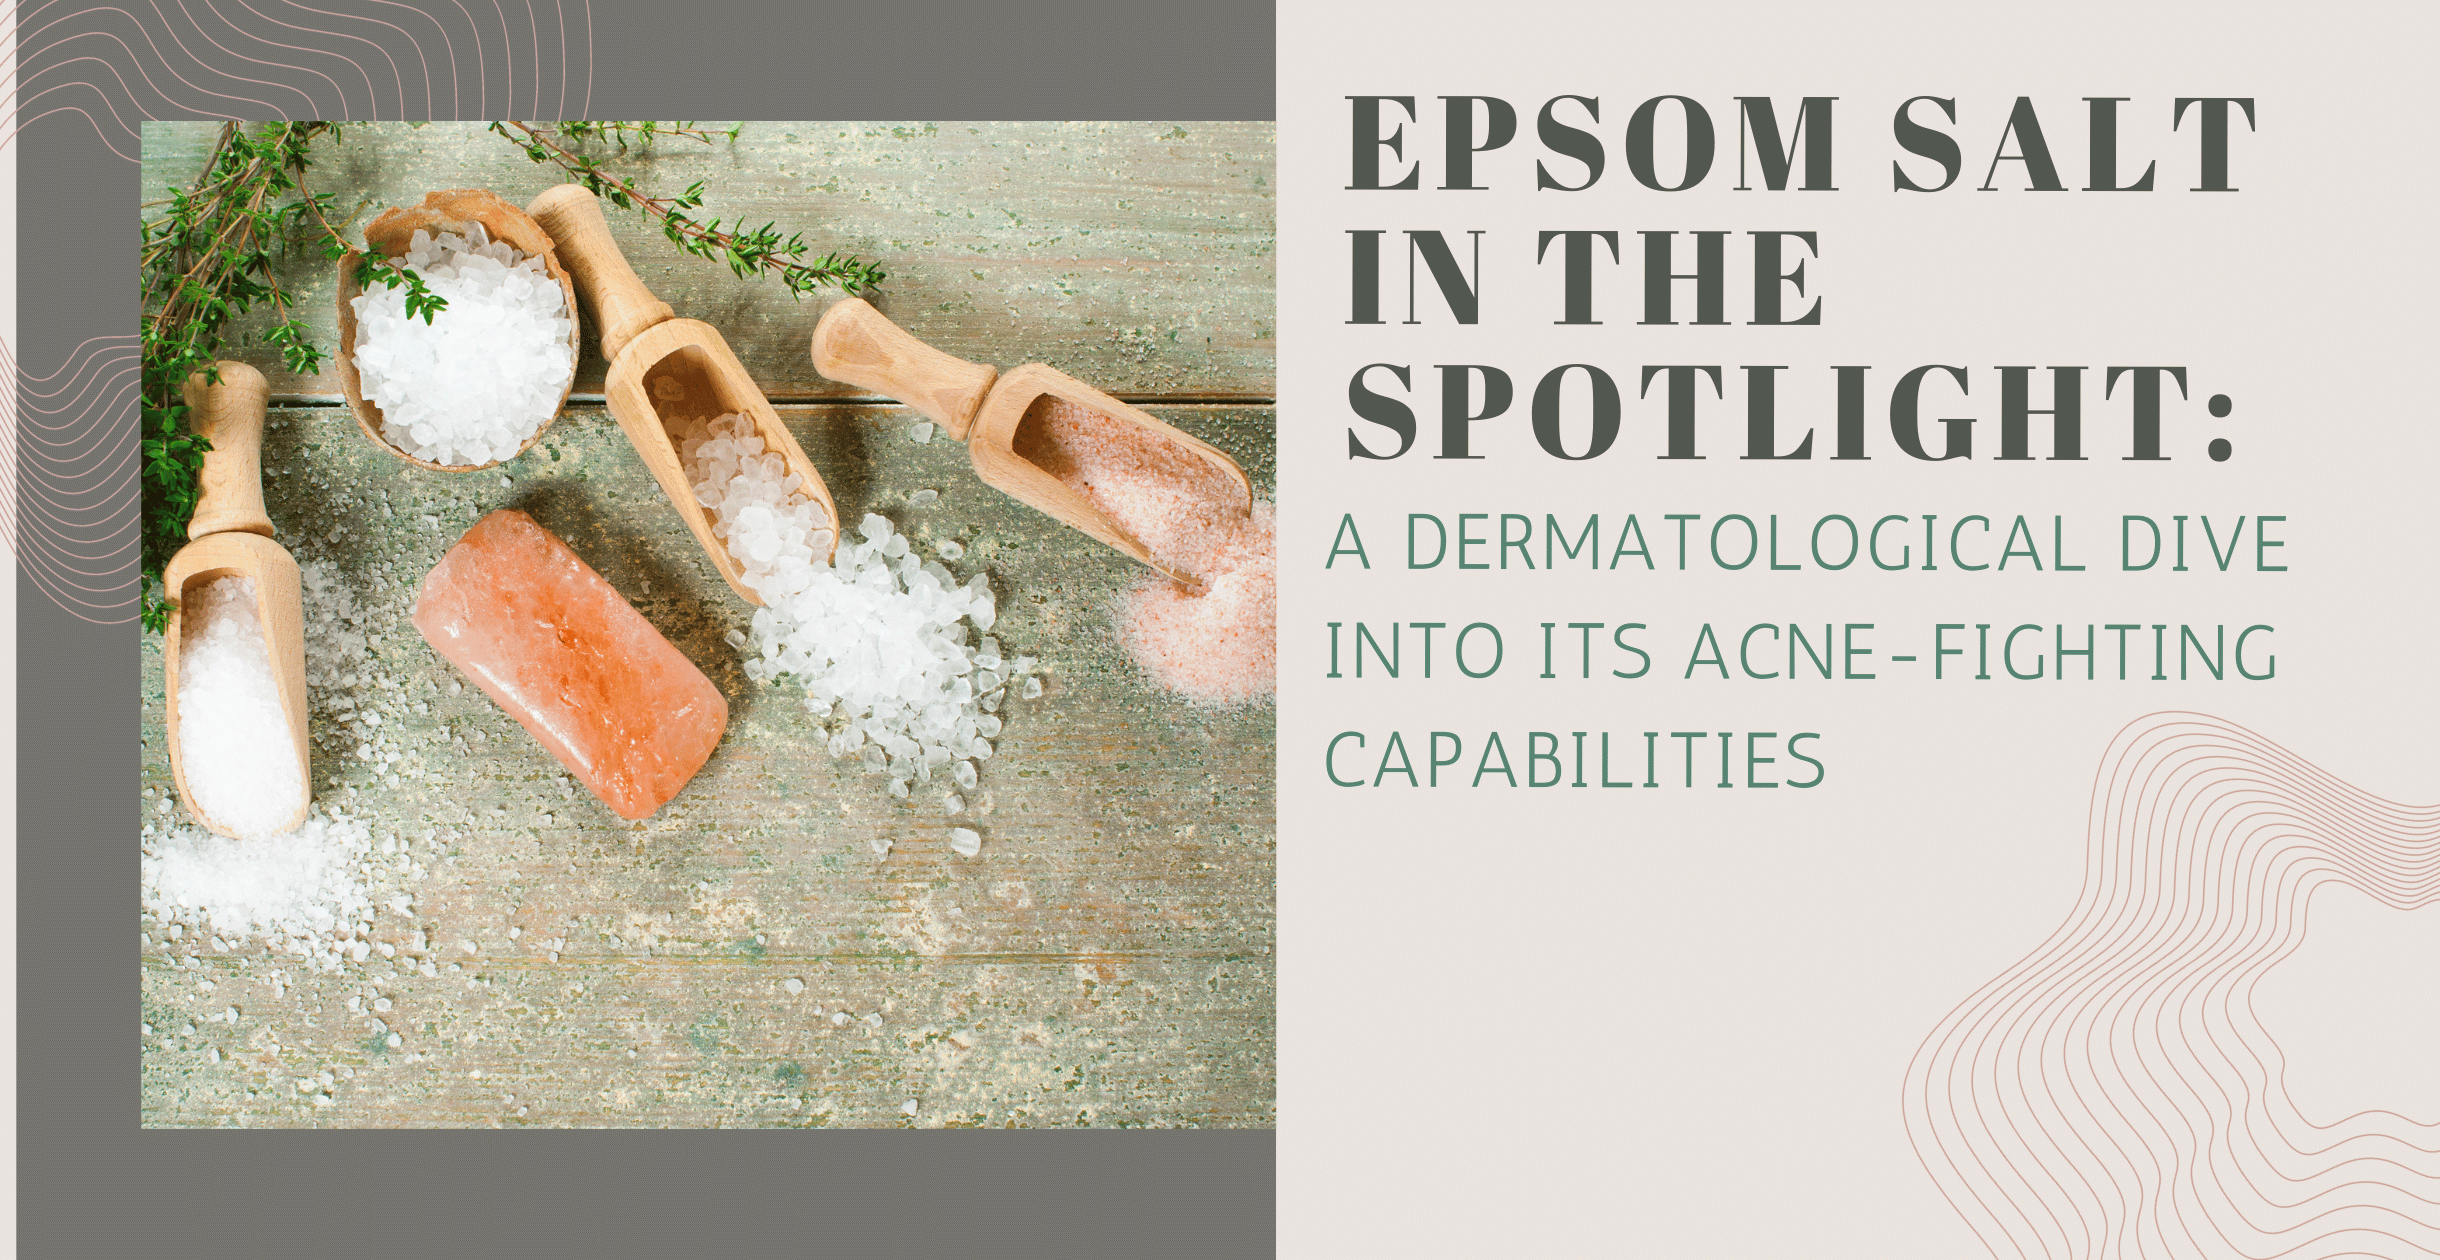 Epsom Salt in the Spotlight: A Dermatological Dive into Its Acne-Fighting Capabilities